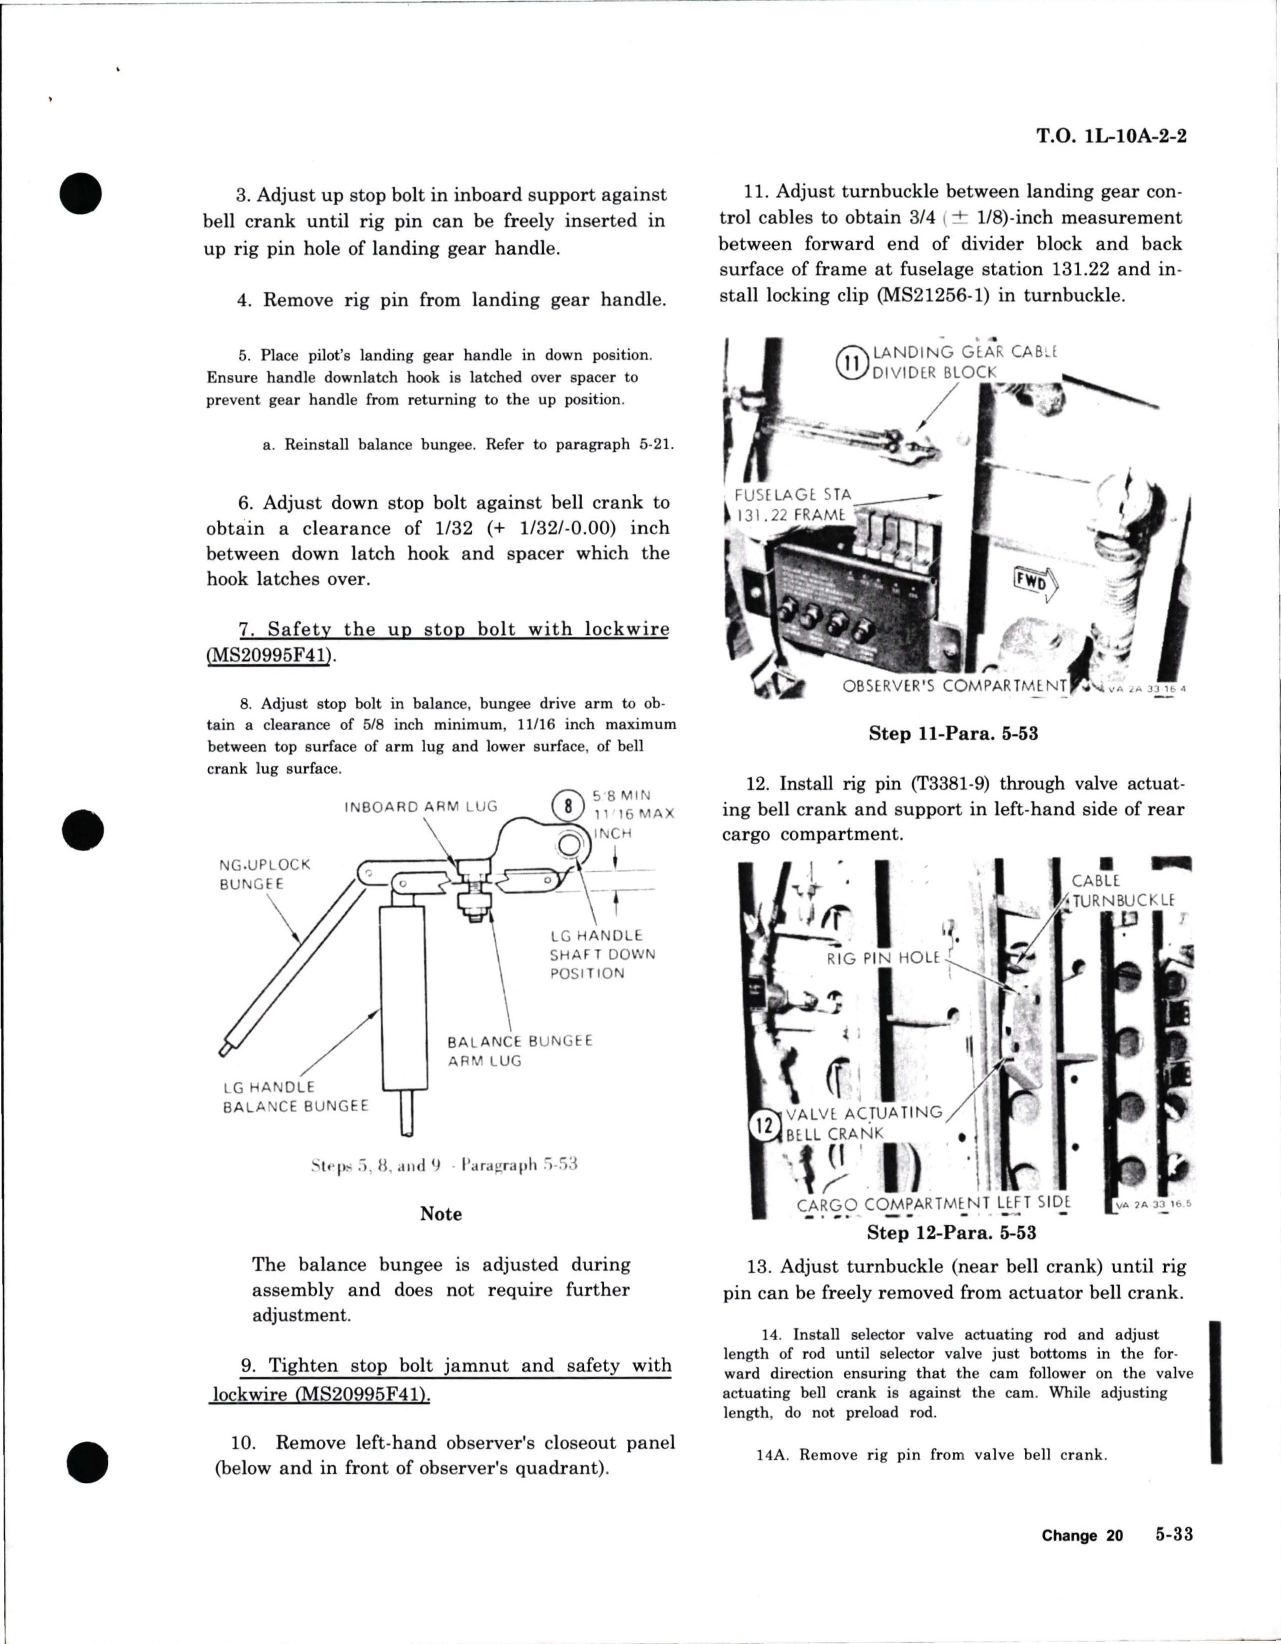 Sample page 7 from AirCorps Library document: Maintenance Instructions for Airframe Systems on OV-10A